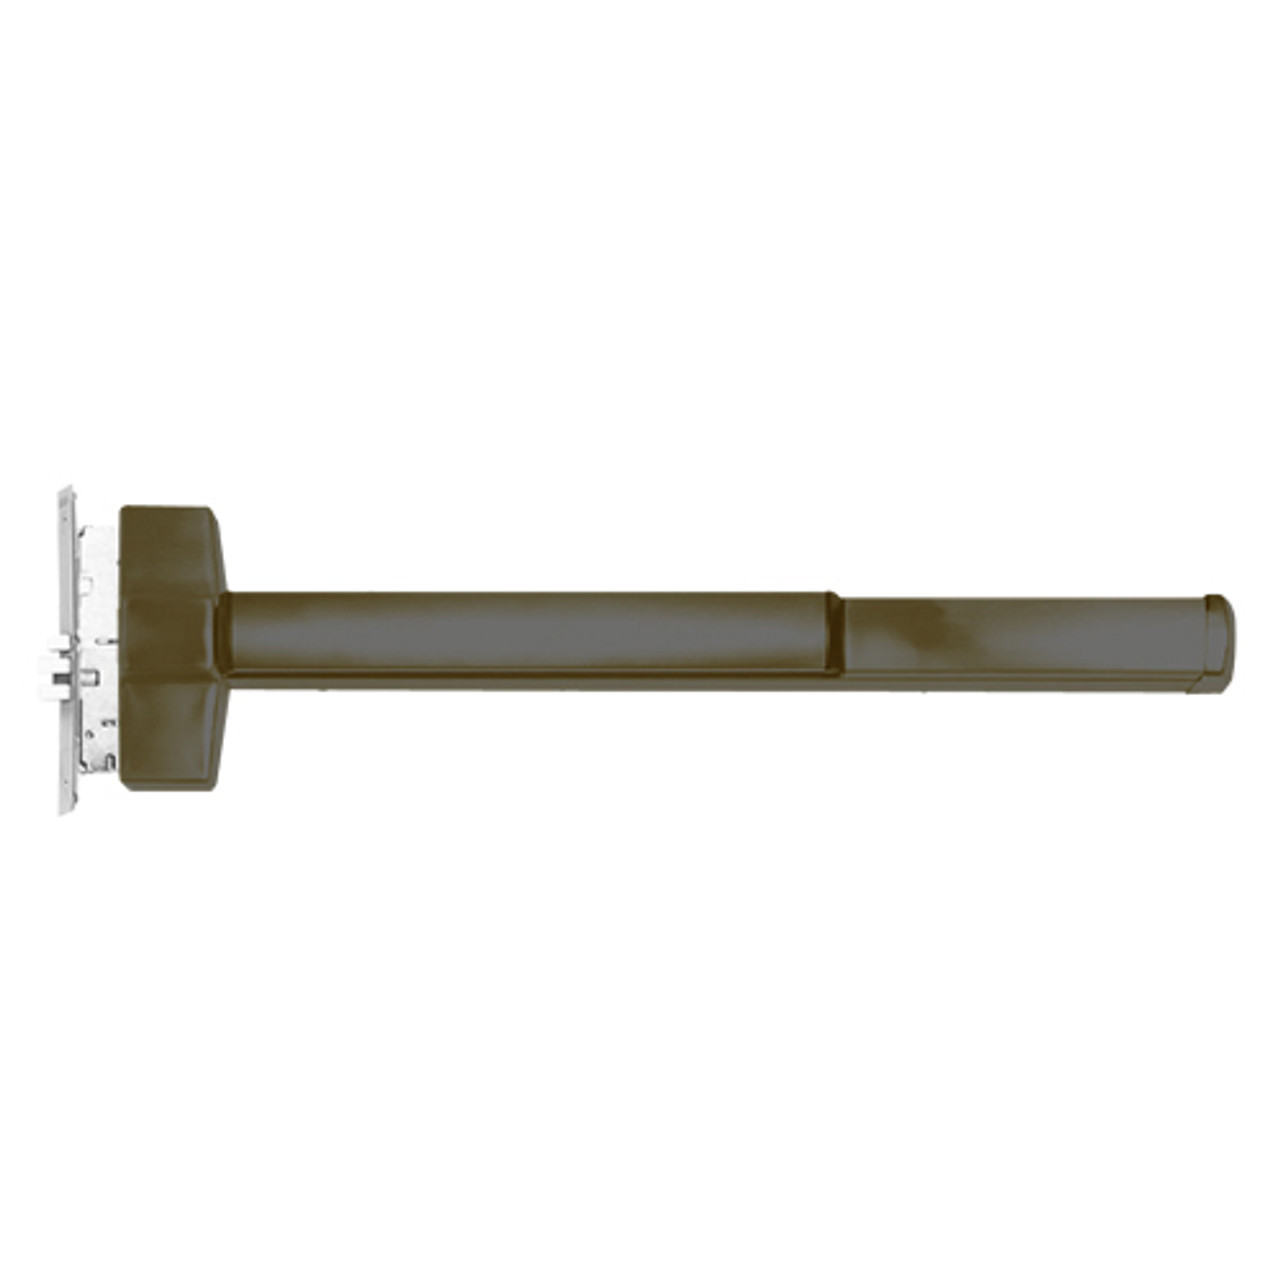 ED5600ALD-613-LHR Corbin ED5600 Series Fire Rated Mortise Exit Device with Delayed Egress in Oil Rubbed Bronze Finish